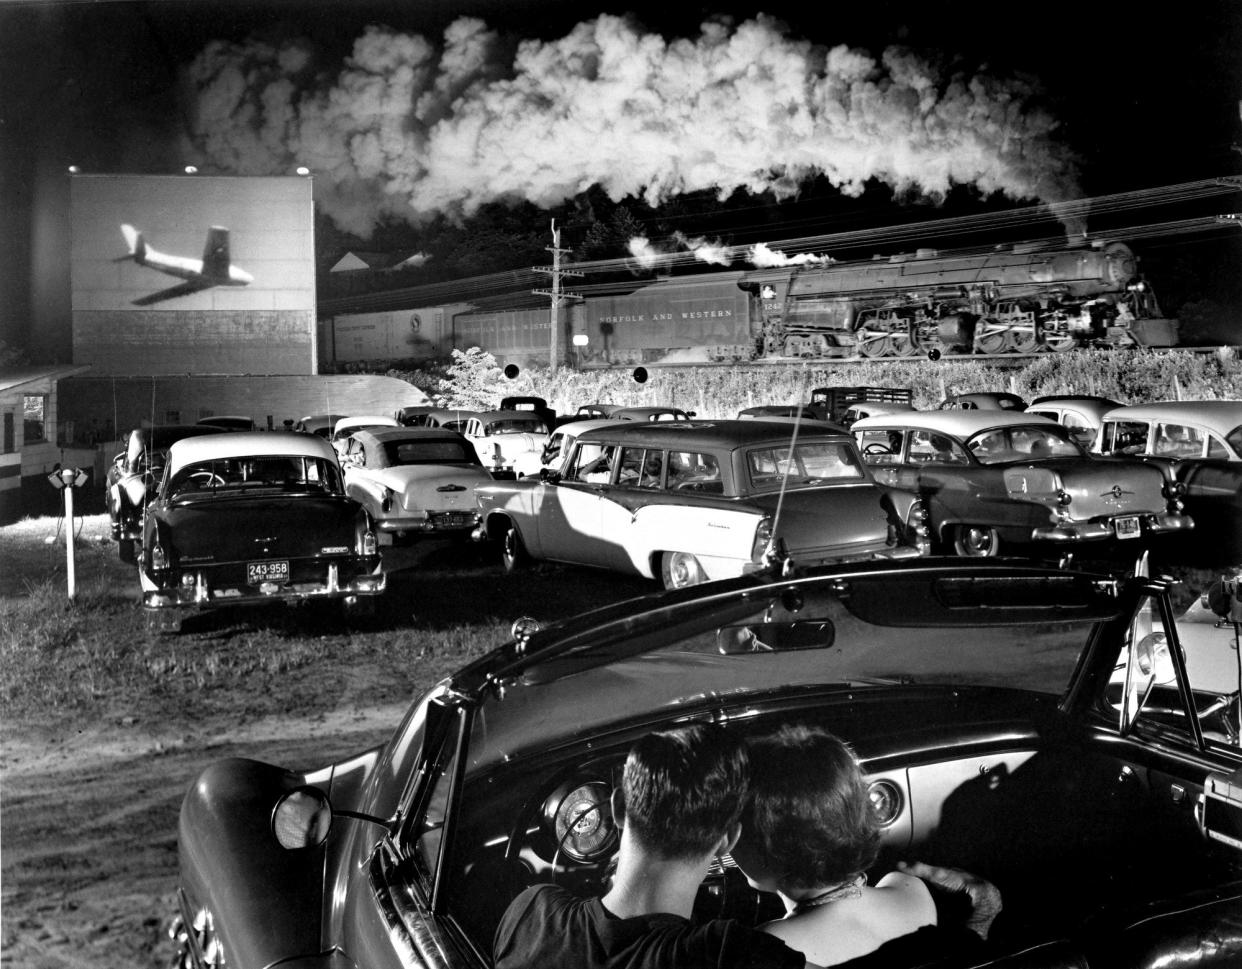 O. Winston Link,  "Hot Shot Eastbound, Iaeger, West Virginia," Aug. 2, 1956 (printed 1982-83), gelatin silver print. Collection of the Akron Art Museum.